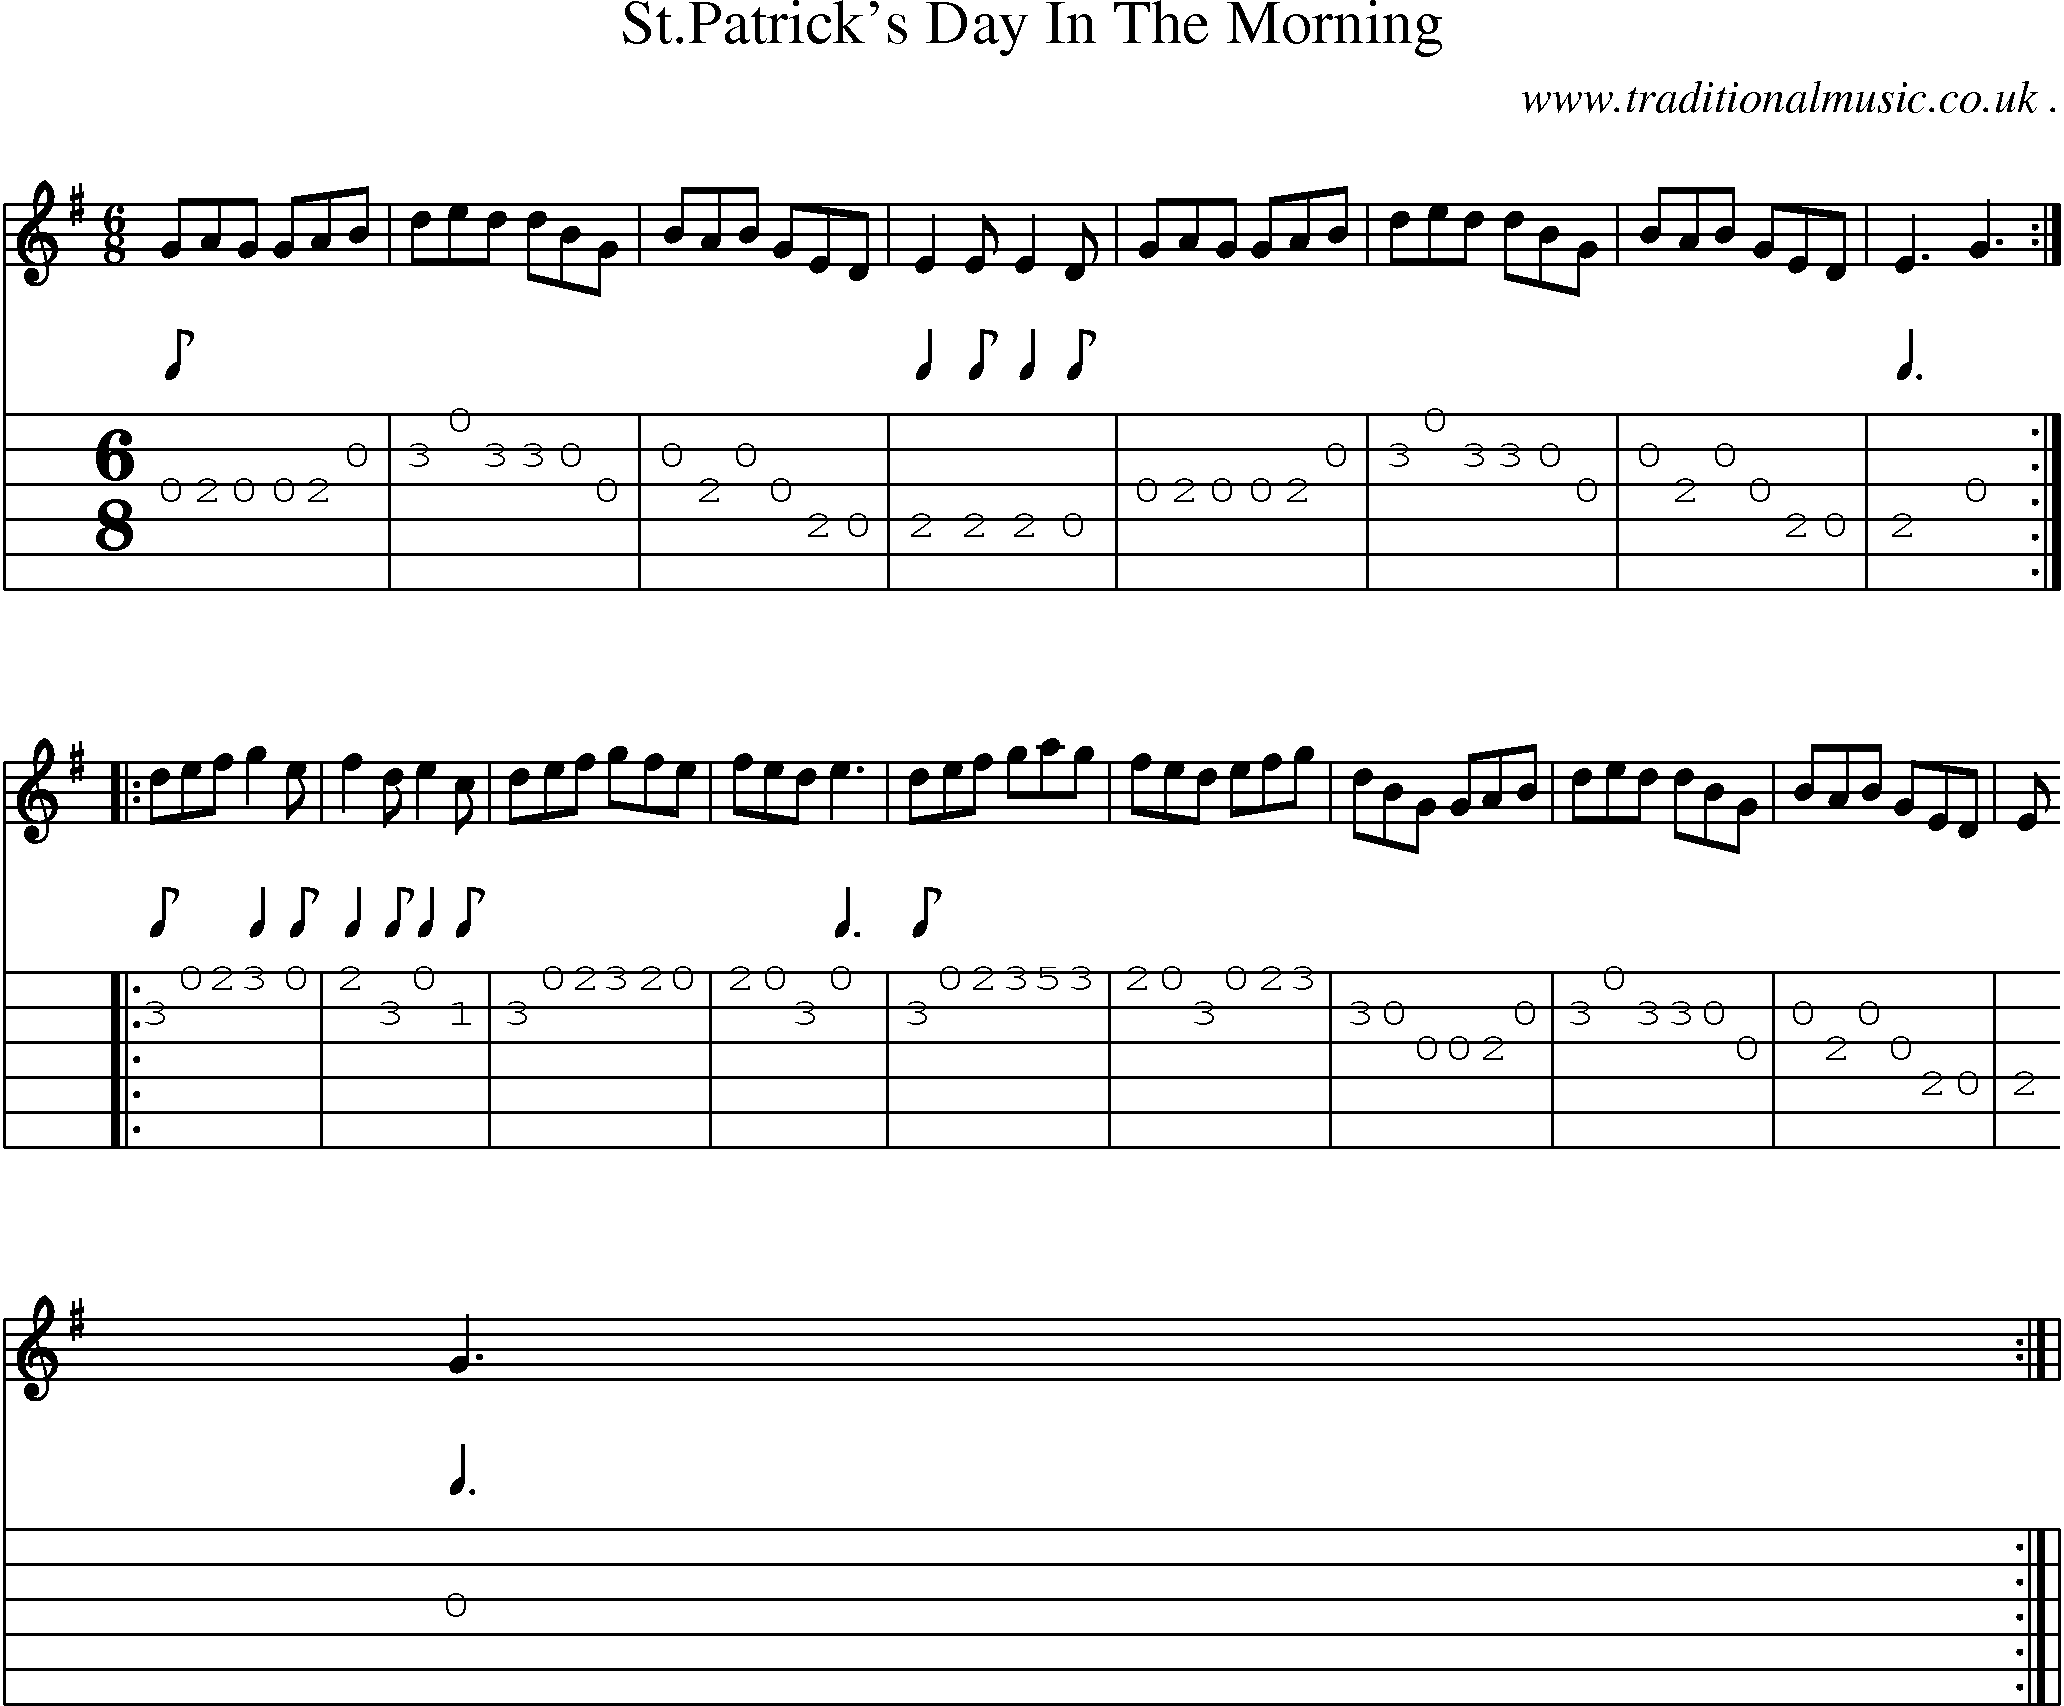 Sheet-Music and Guitar Tabs for Stpatricks Day In The Morning